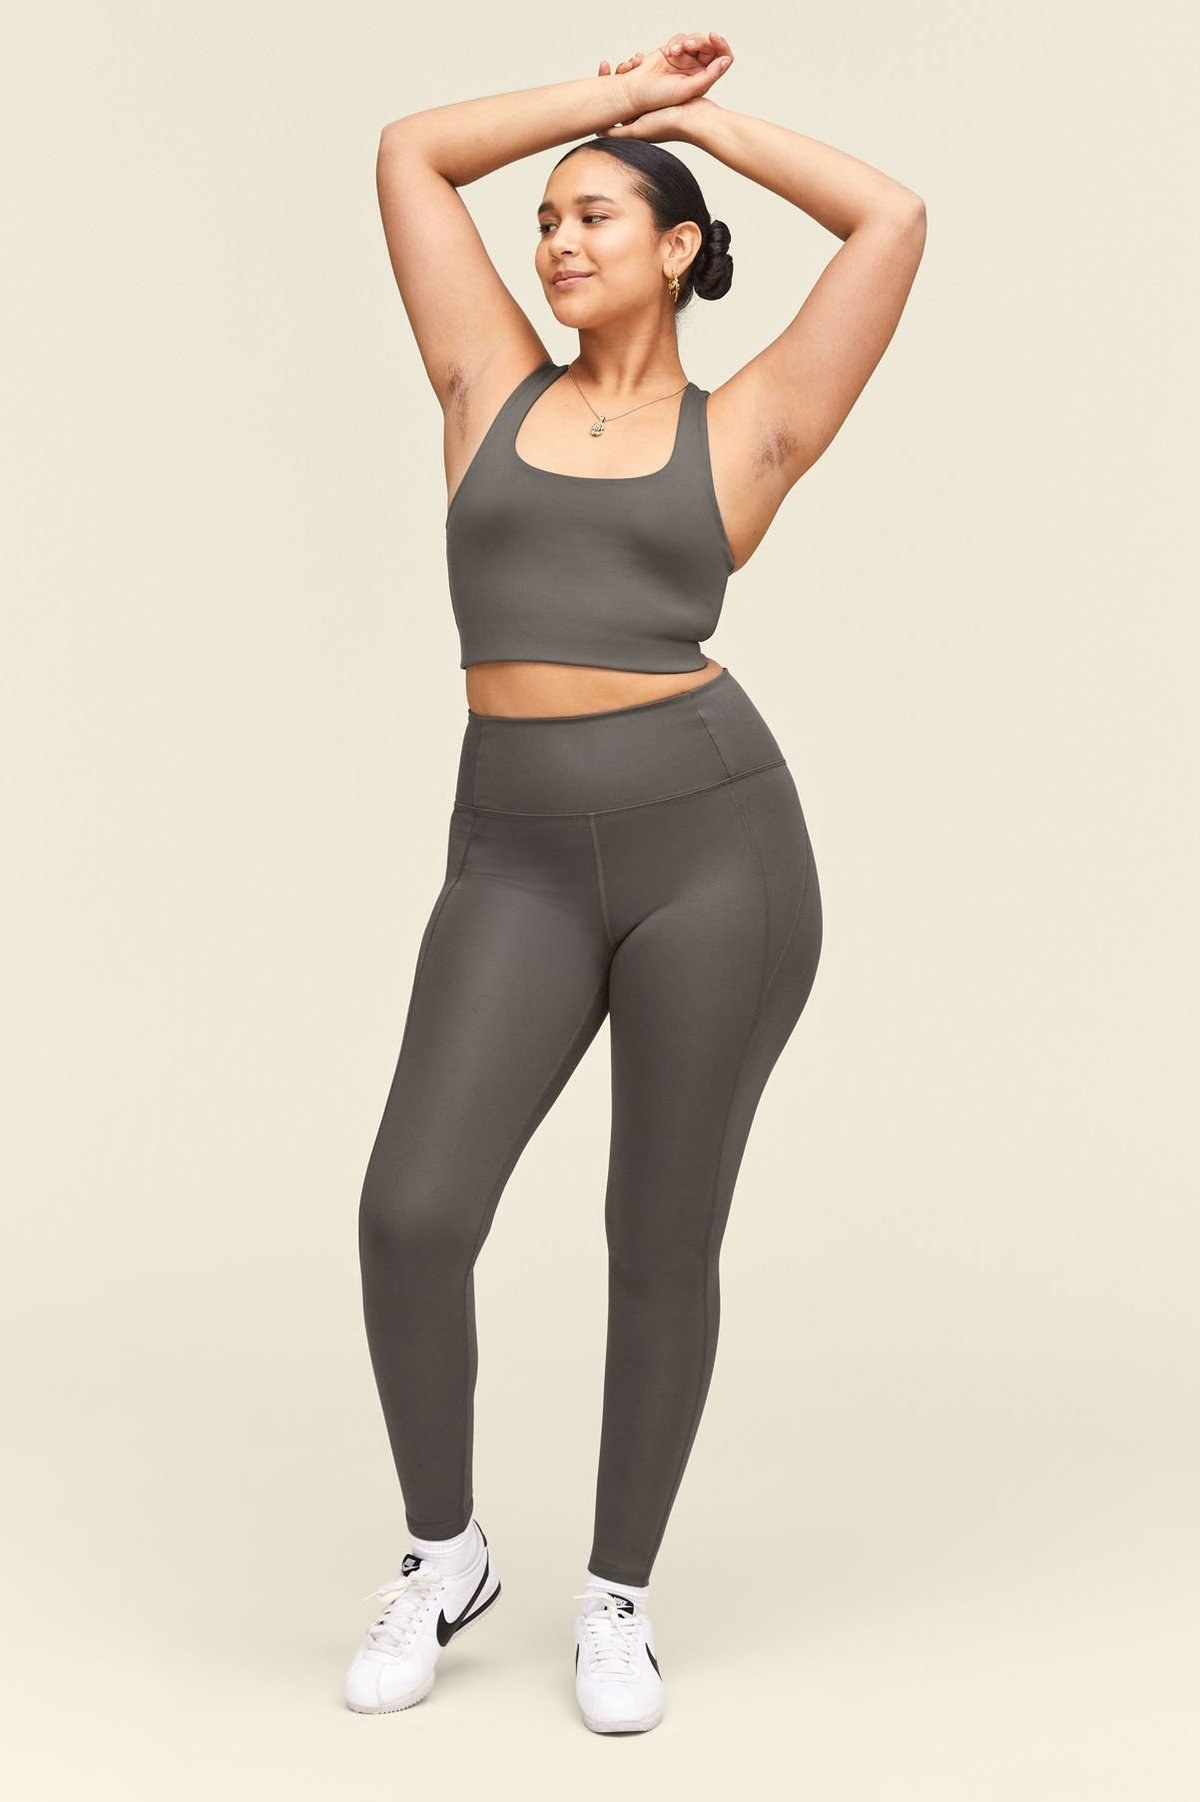 model wearing the gray matching leggings and sports bra 